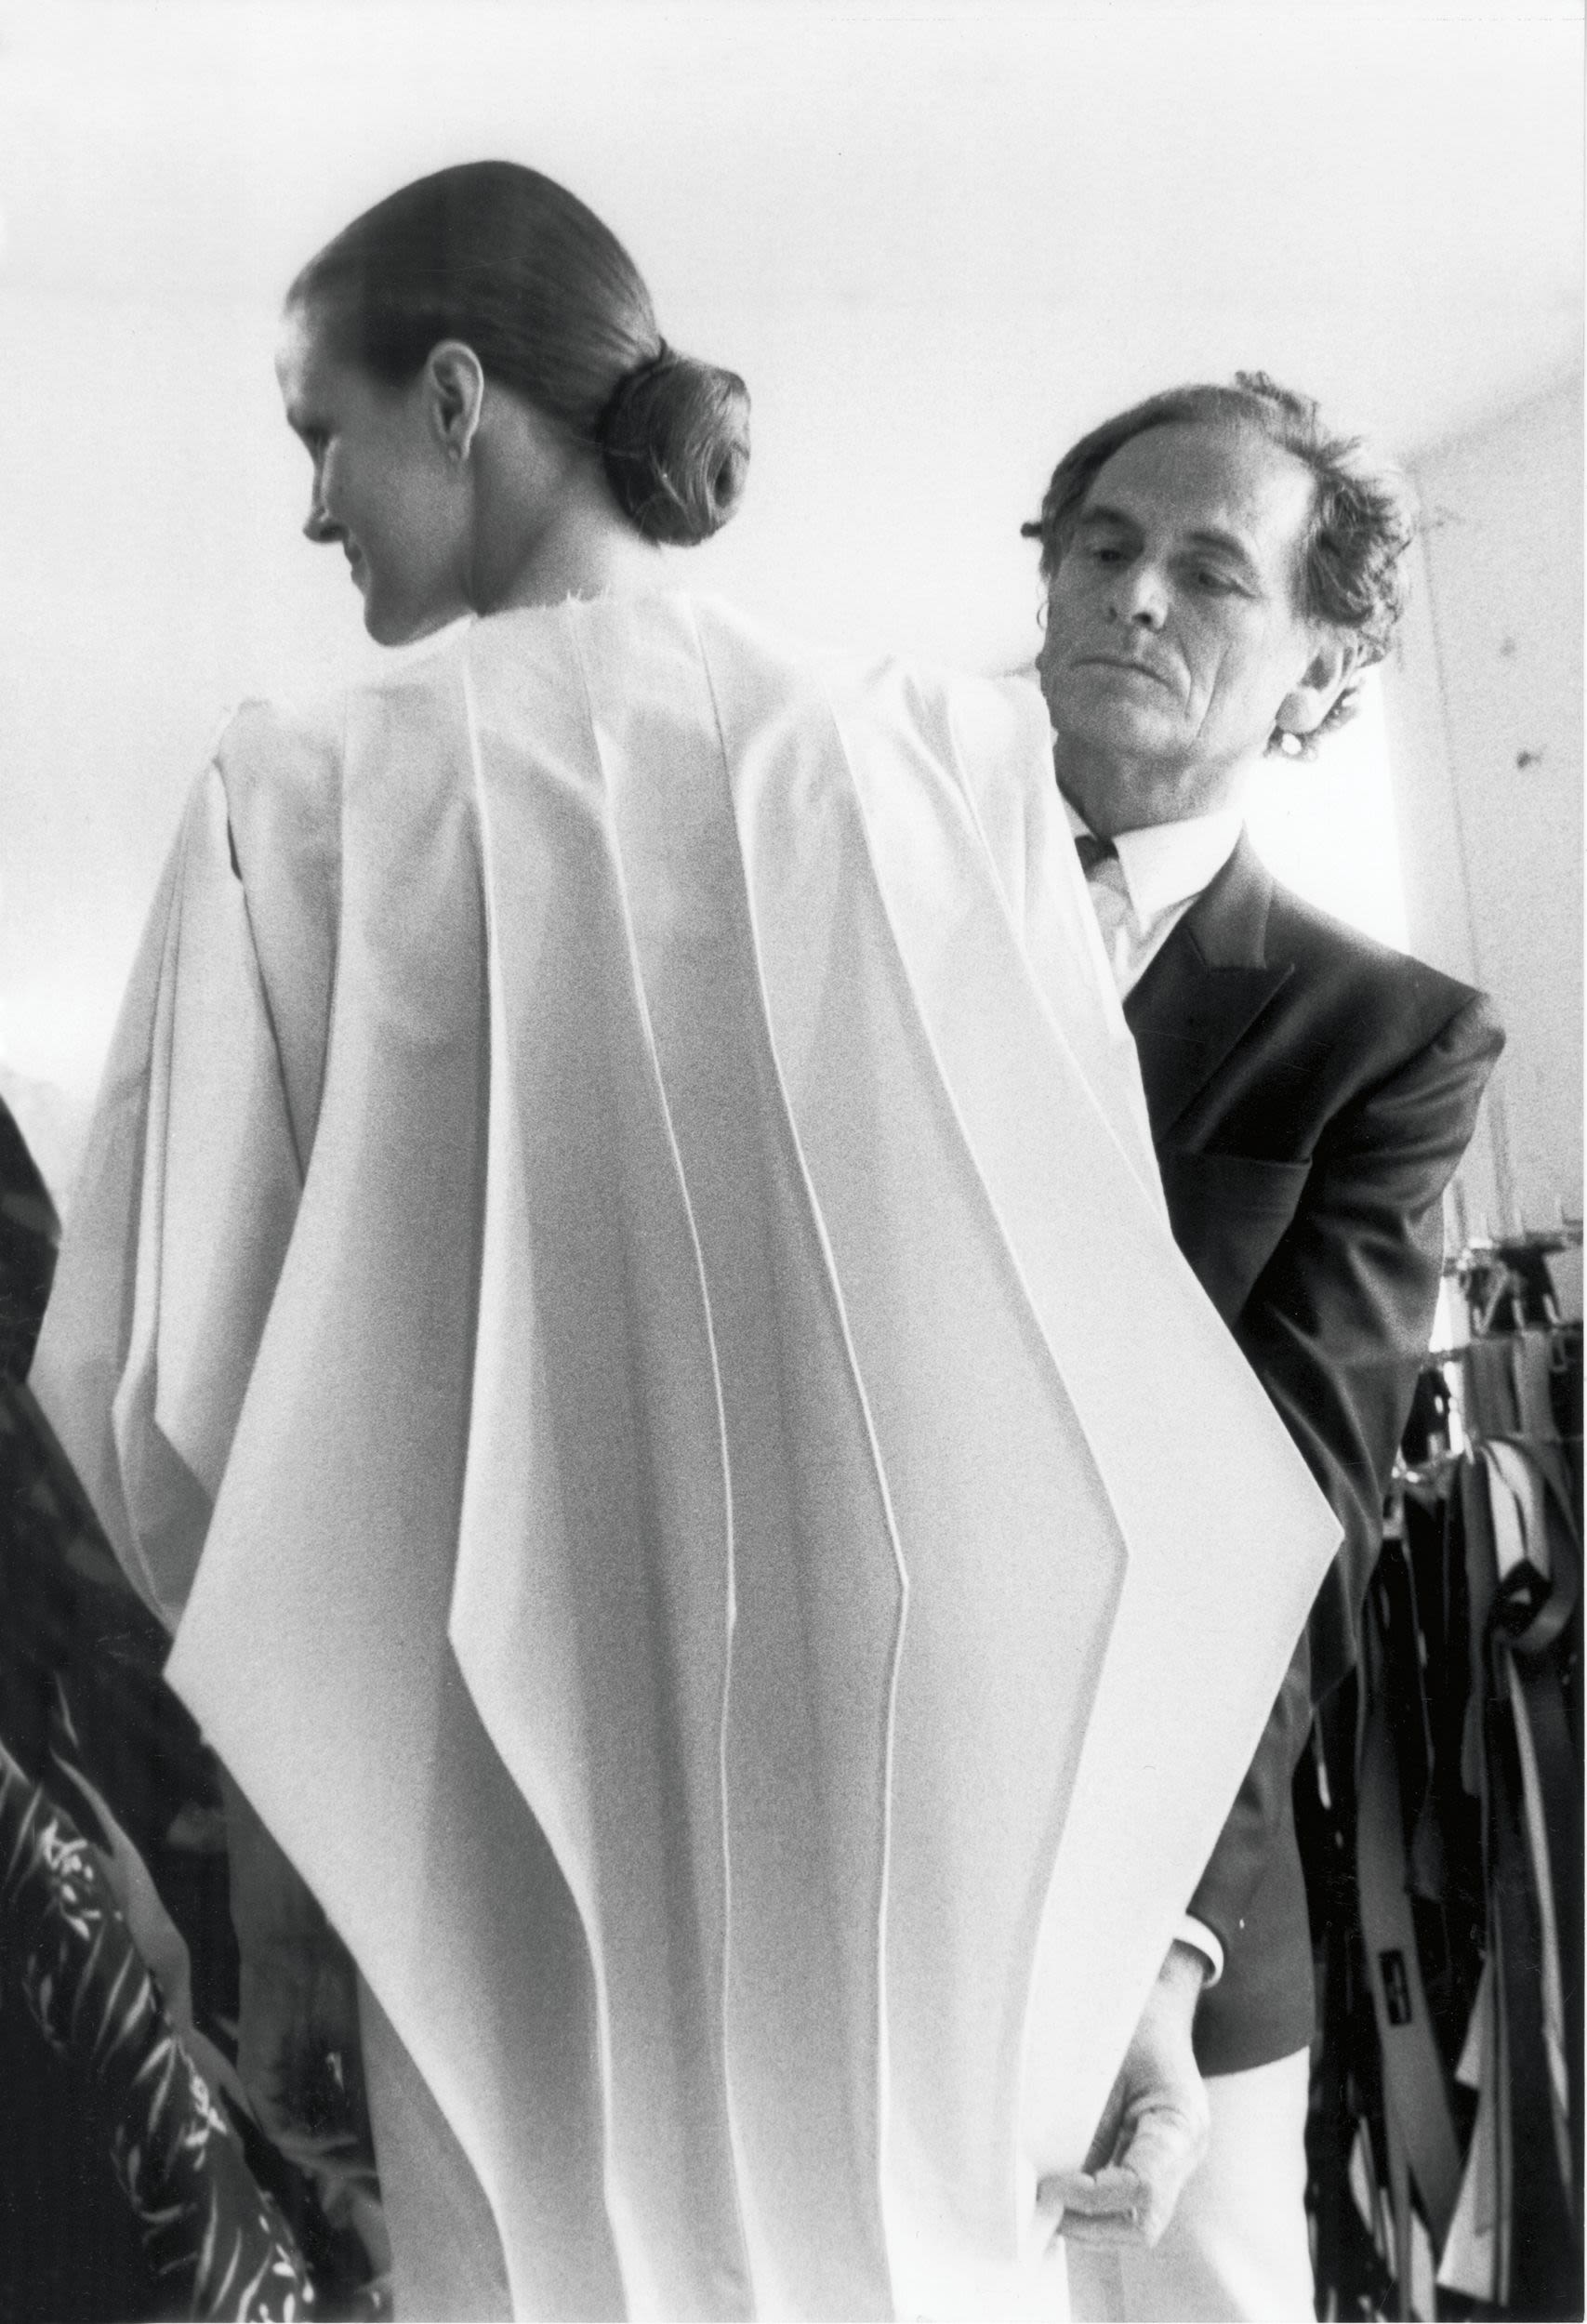 Pierre Cardin: The 97-year-old fashion designer with visions for